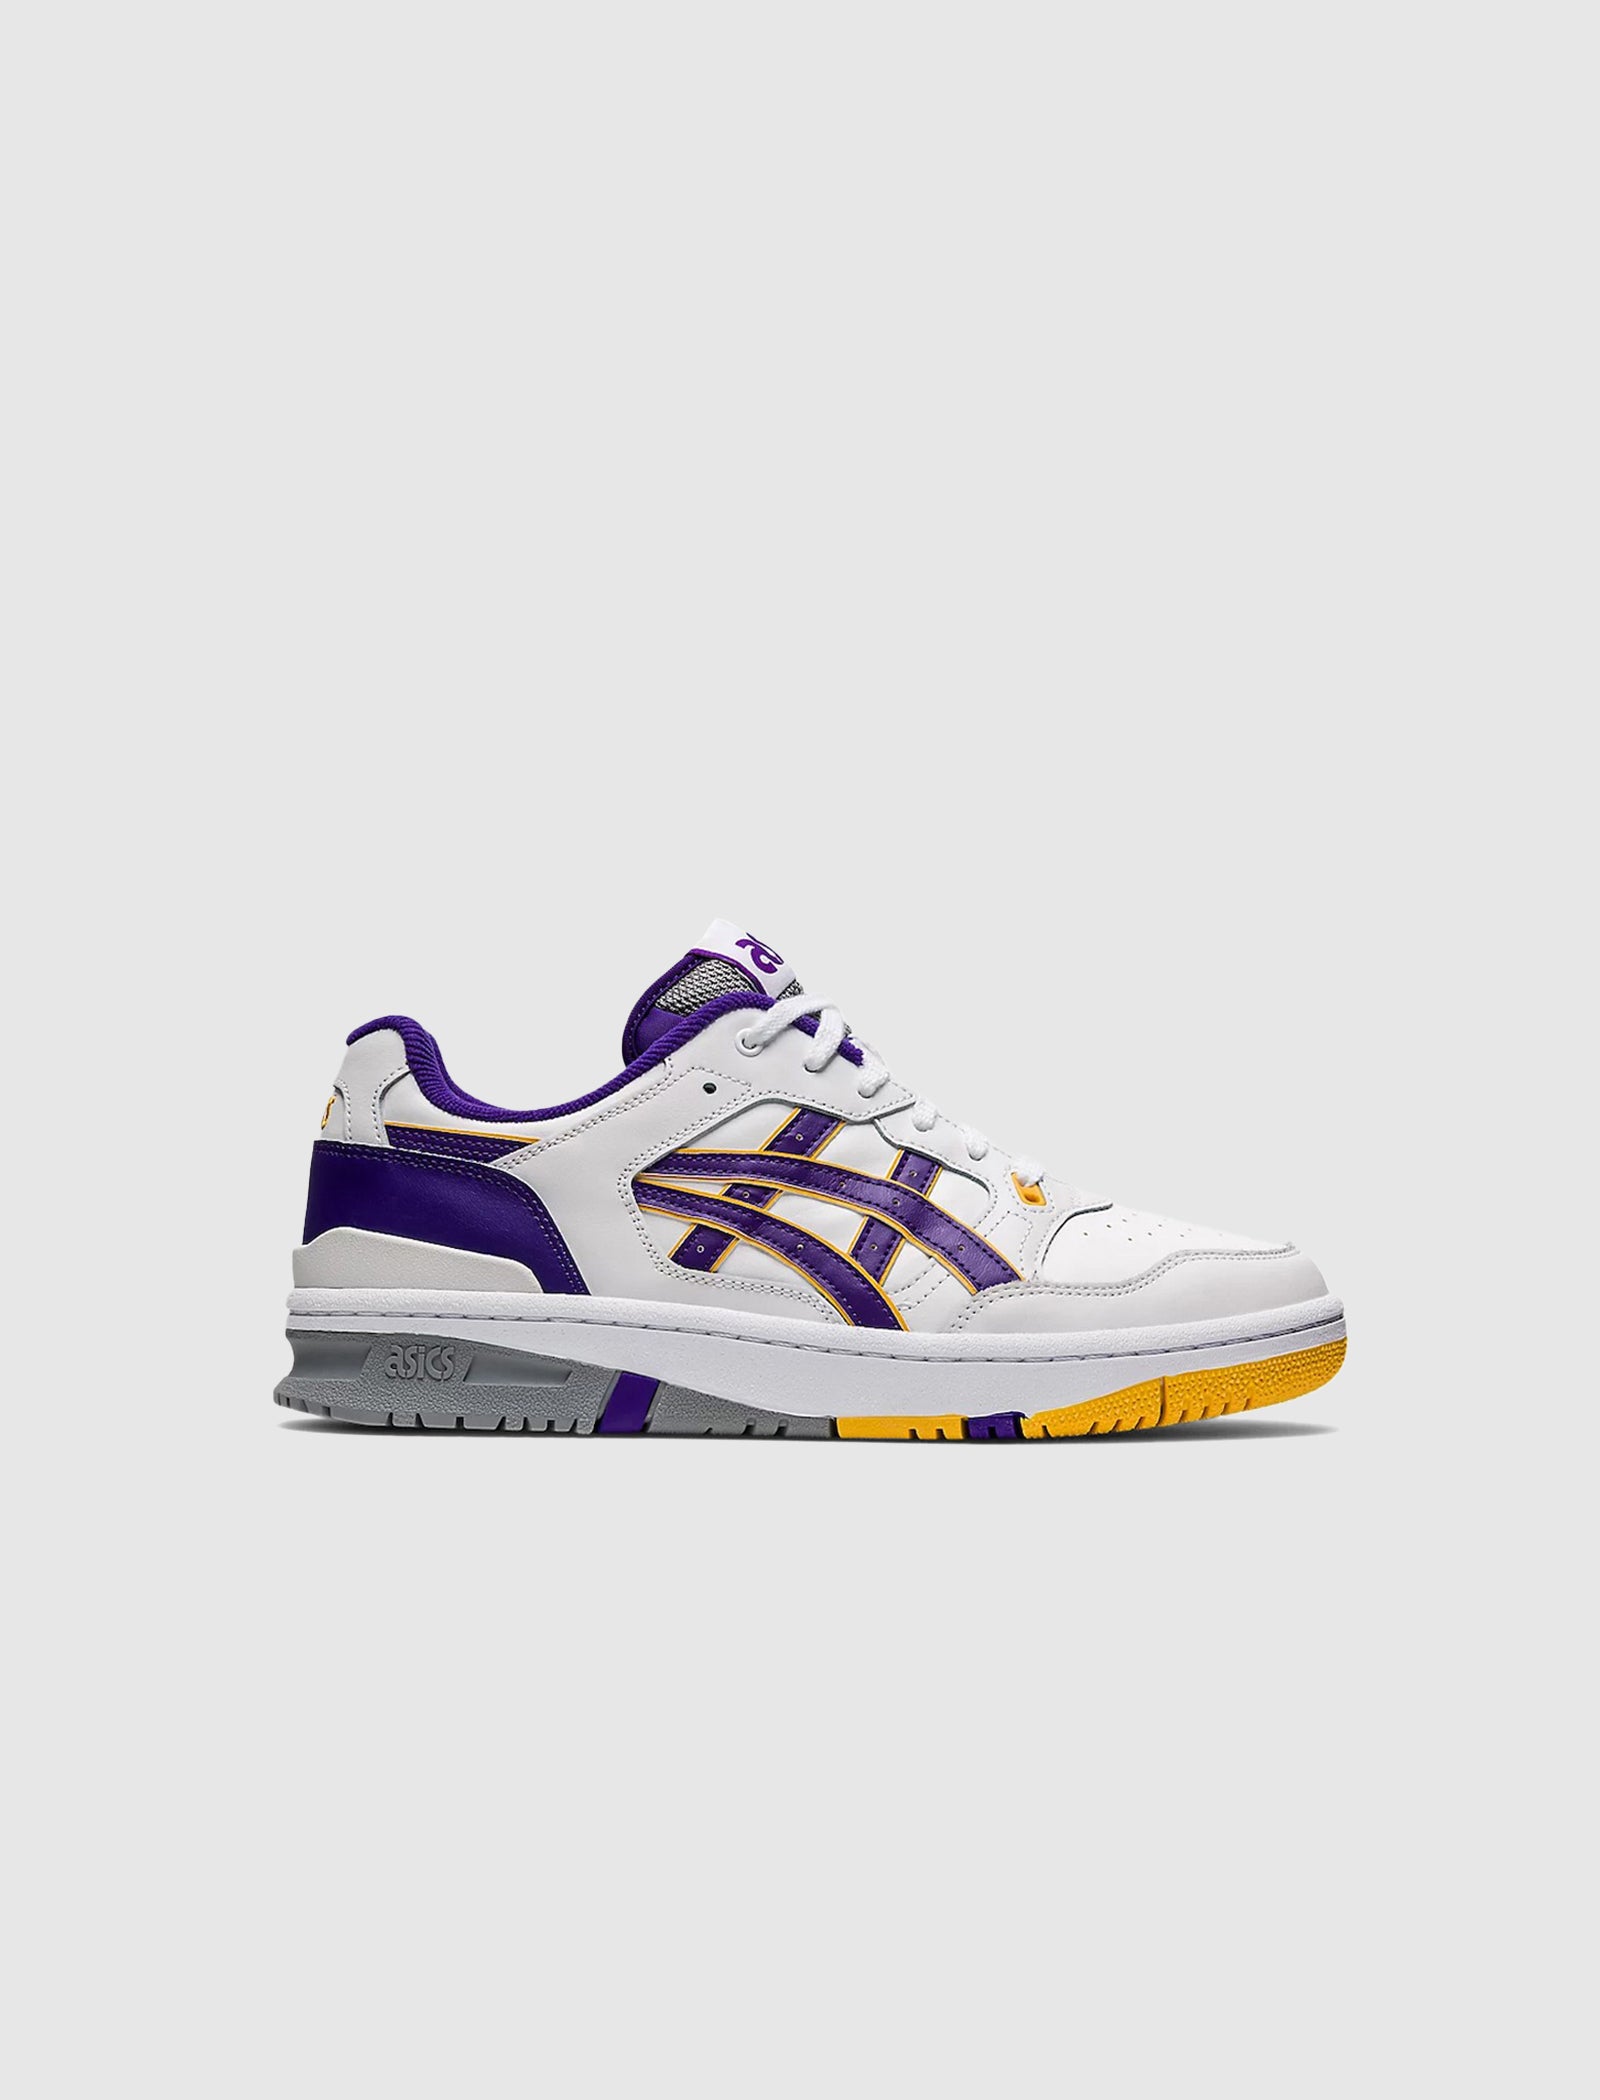 EX89 "LAKERS"